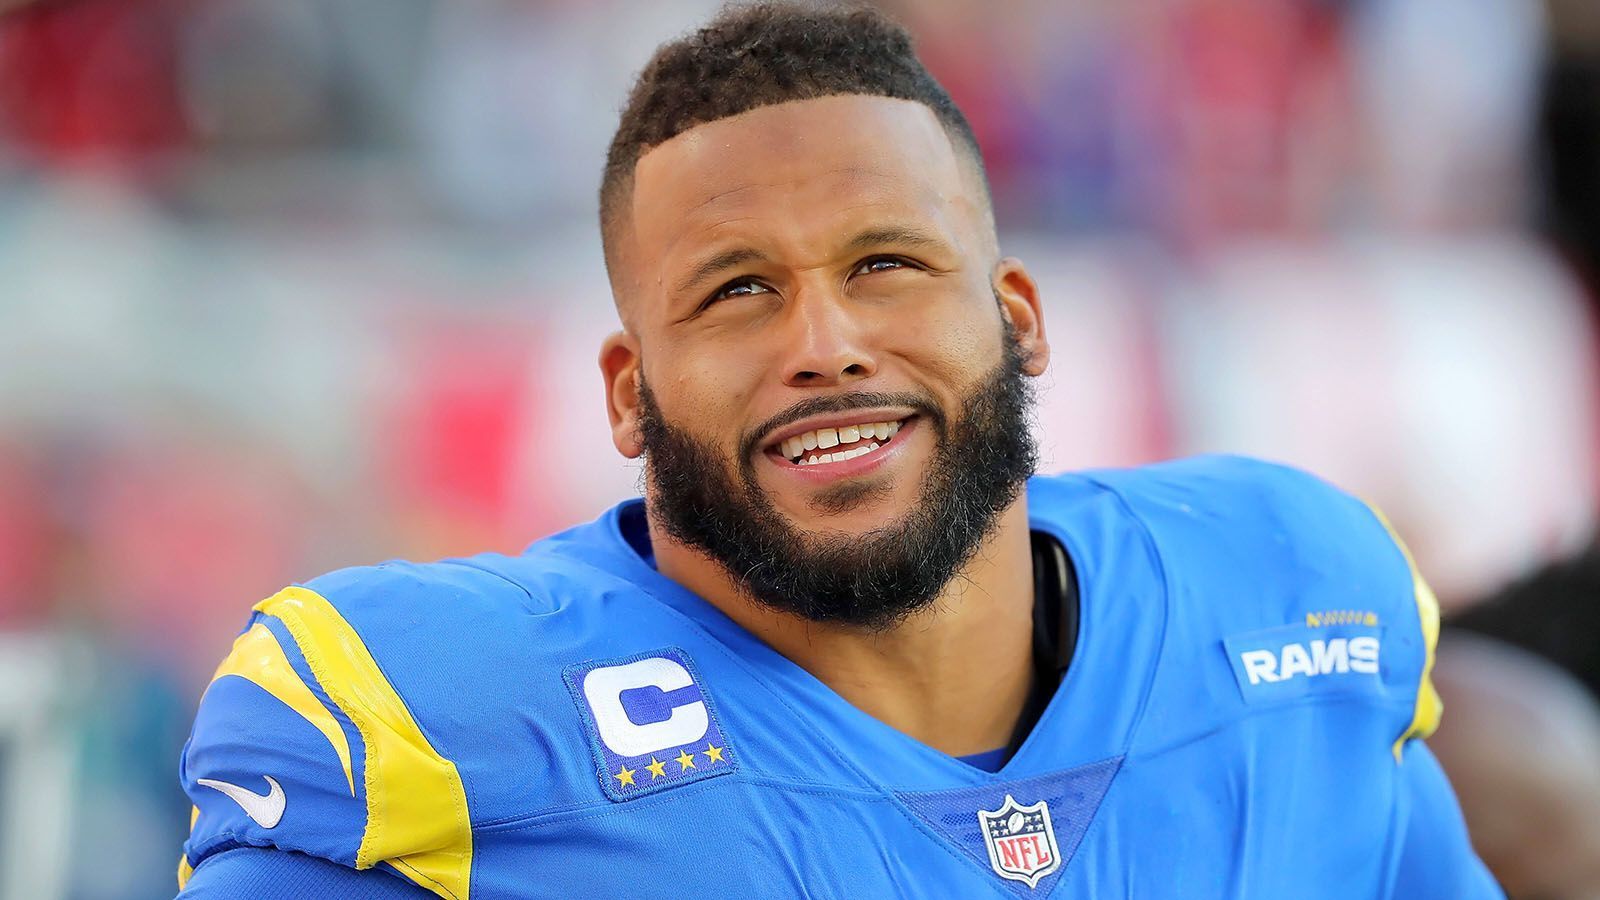 
                <strong>1. Platz: Aaron Donald</strong><br>
                &#x2022; Team: Los Angeles Rams<br>&#x2022; Position: Right Defensive End<br>&#x2022; <strong>Overall Rating: 99</strong><br>&#x2022; Key Stats: Speed: 82 - Strength: 99 - Awareness: 99<br>
              